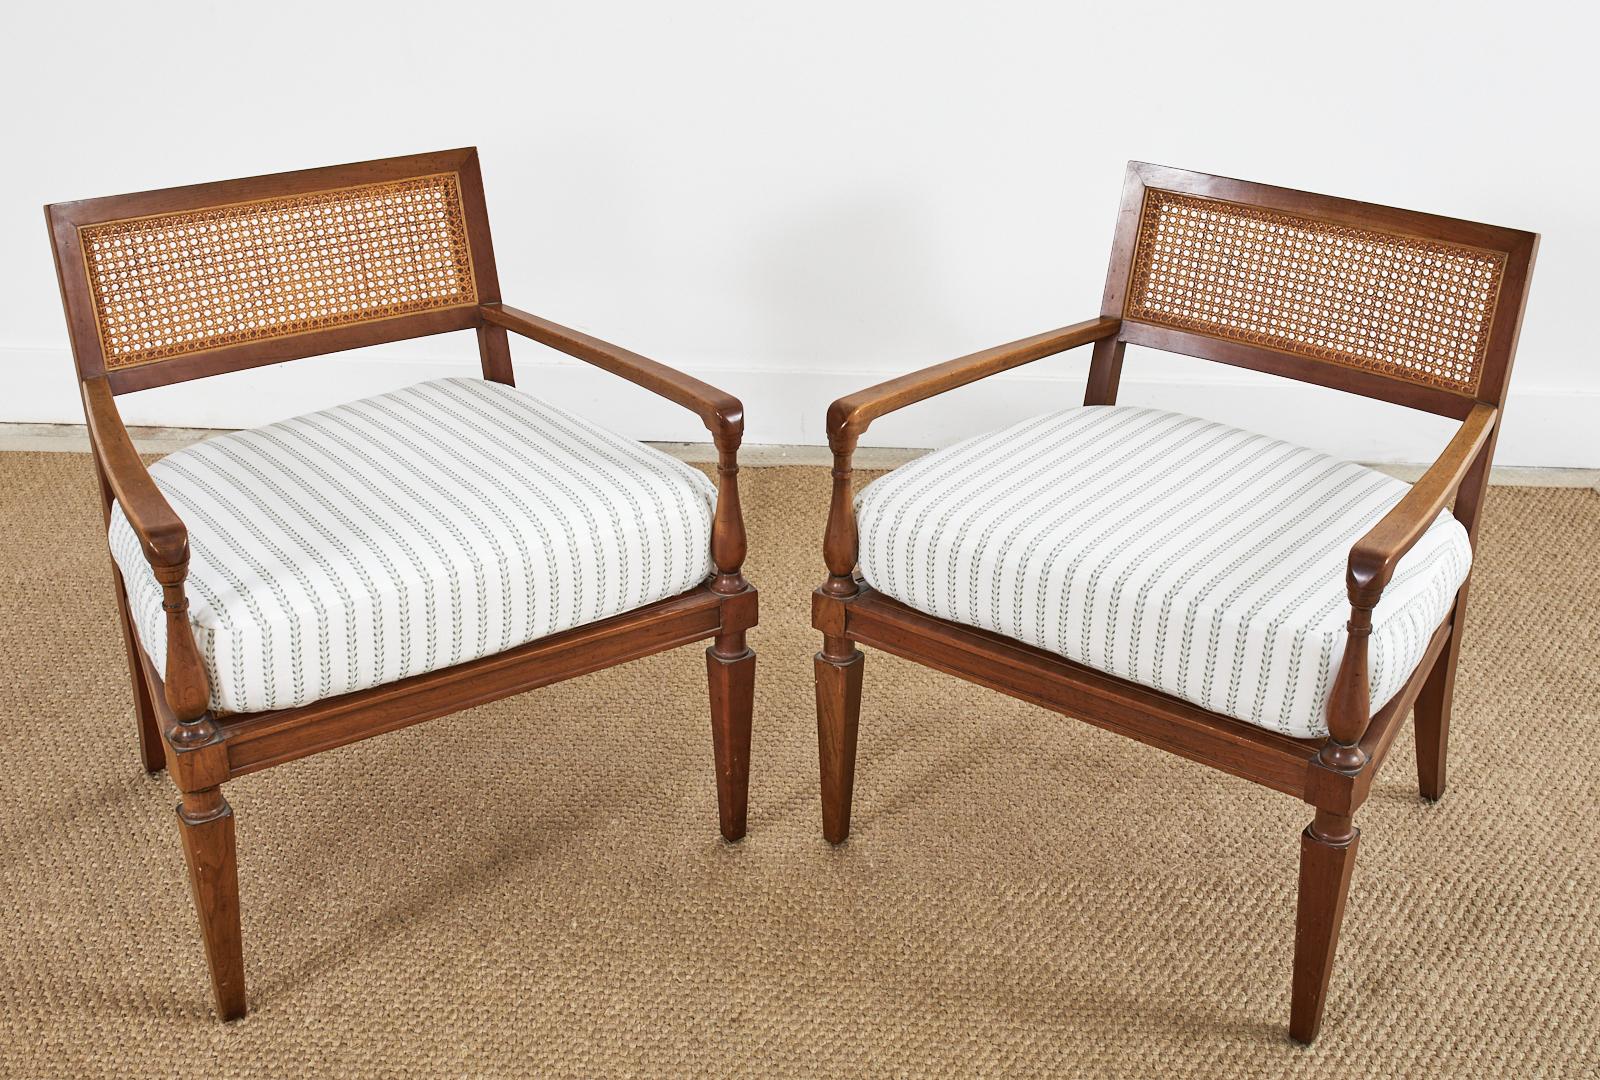 American Pair of Neoclassical Style Walnut Cane Lounge Chairs by Baker